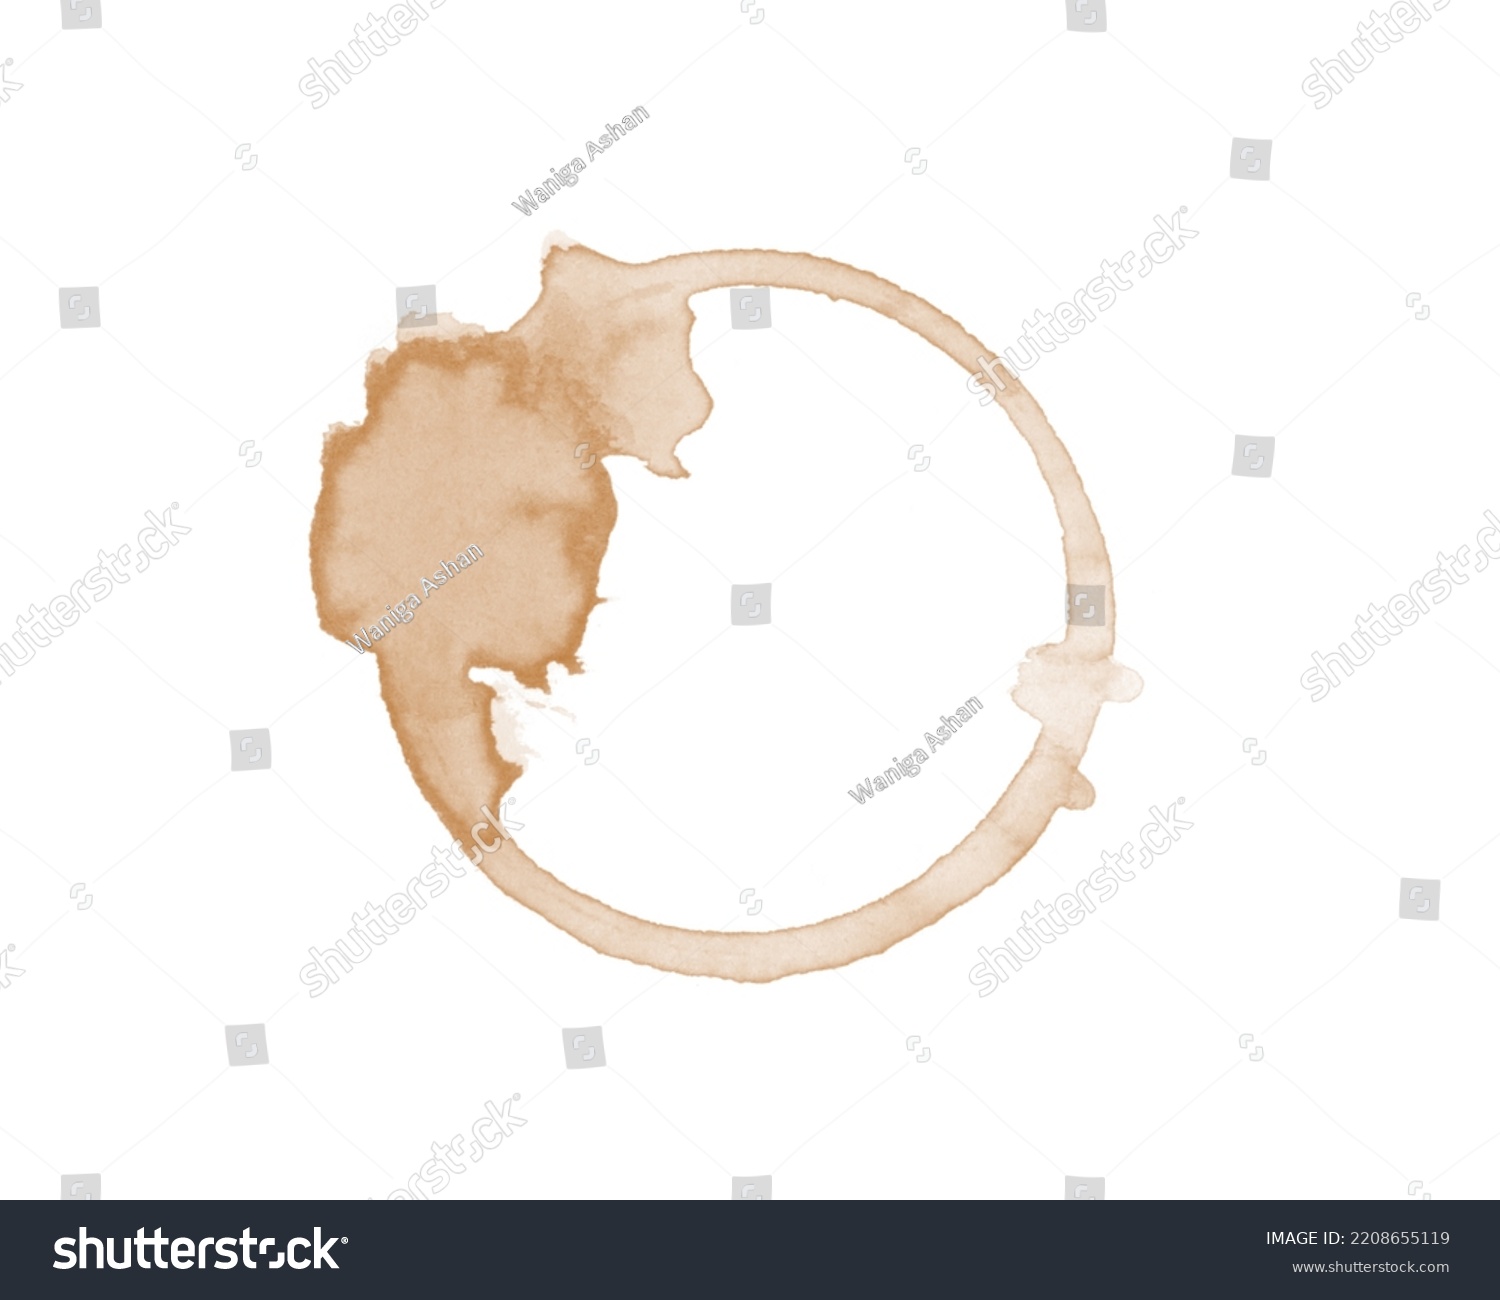 Coffee Stain on paper. Coffee or tea stains and traces - modern isolated clip art on white background. Splashes of cups, mugs and drops. Use this high quality set for your menu, bar, Cafe, restaurant. #2208655119